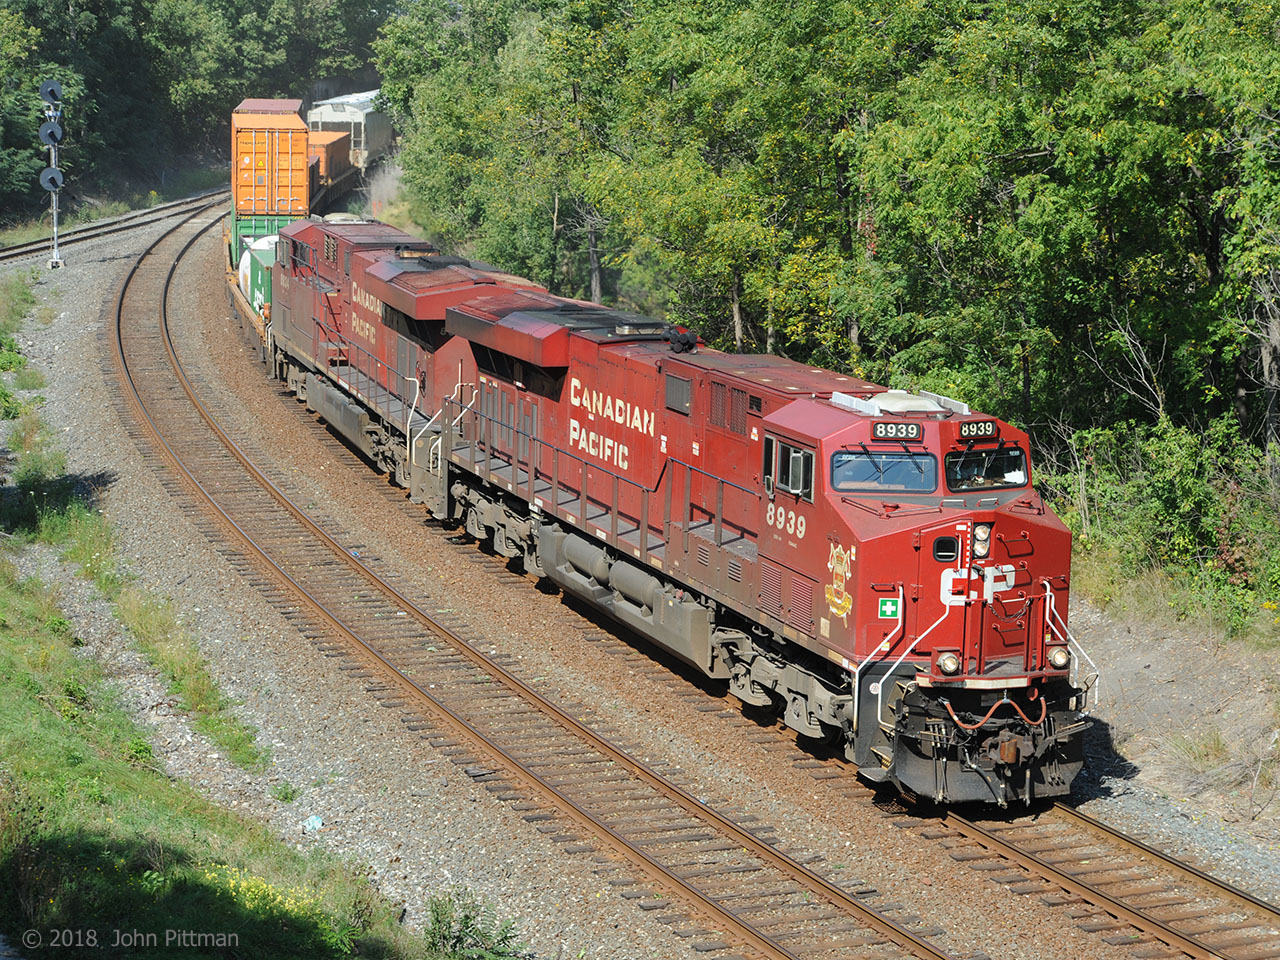 CP 8939 (ES44ac) displays the name Strathcona and emblem of a Canadian Armed Forces Regiment, Lord Strathcona's Horse (Royal Canadians).  Assisted by CP 8834 (AC4400), train 246 is southbound on the east main track of the CP Hamilton sub alongside the Aberdeen wye, heading toward the Hunter Street tunnel.  
Scottish-born Canadian businessman Donald Smith, 1st Baron Strathcona and Mount Royal, was co-founder of the Canadian Pacific Railway and the man who drove CP's last spike. A man of many interests and talents, in 1900 at his own expense he raised and equipped "Strathcona's Horse" for service in the South African War. CP has a continuing connection with the regiment. 
Strathcona as a street, town, or district name exists in multiple places in Canada, including the northwest Hamilton neighbourhood that the front of train 246 has just passed out of.